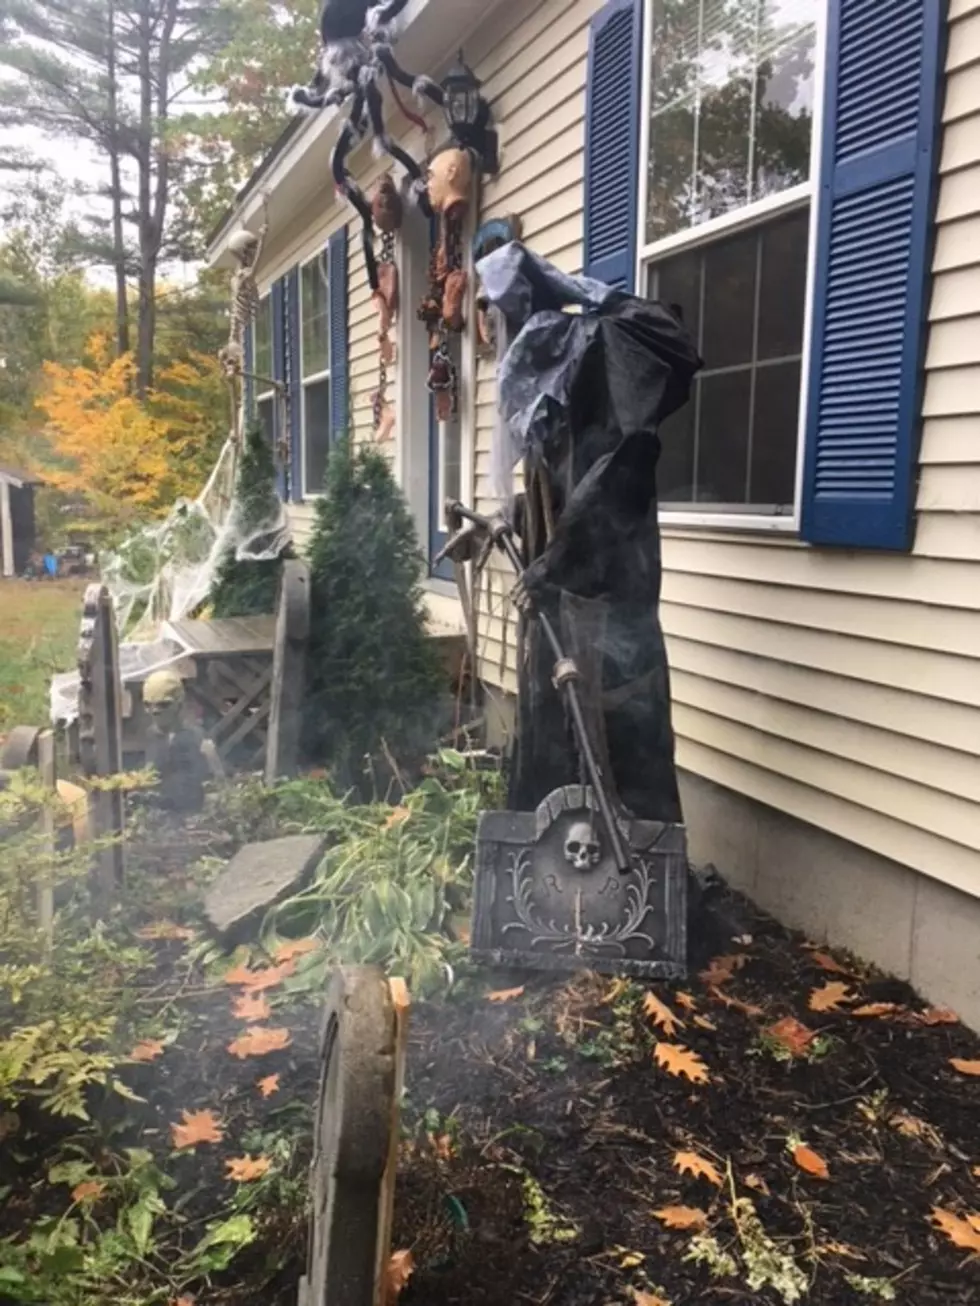 Look at These Cool Halloween Decorations We Found in Limington